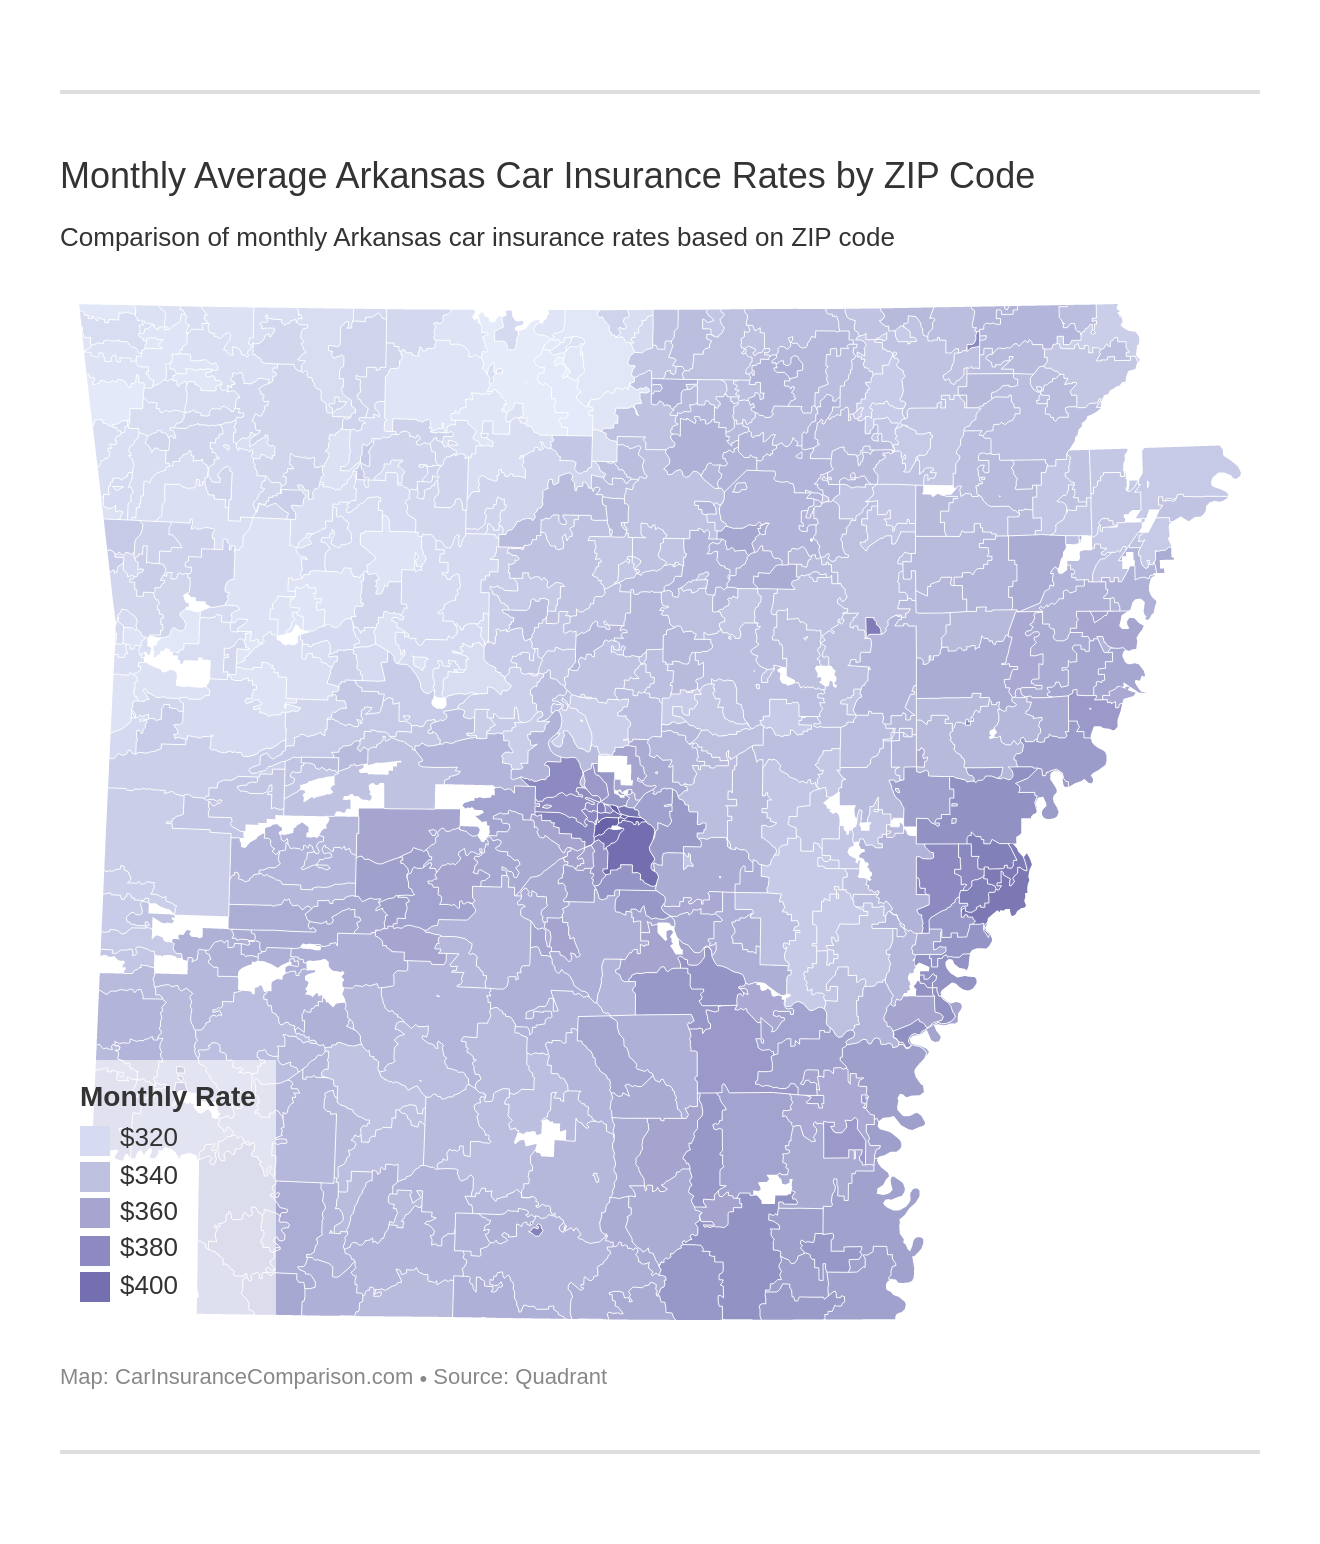 Monthly Average Arkansas Car Insurance Rates by ZIP Code